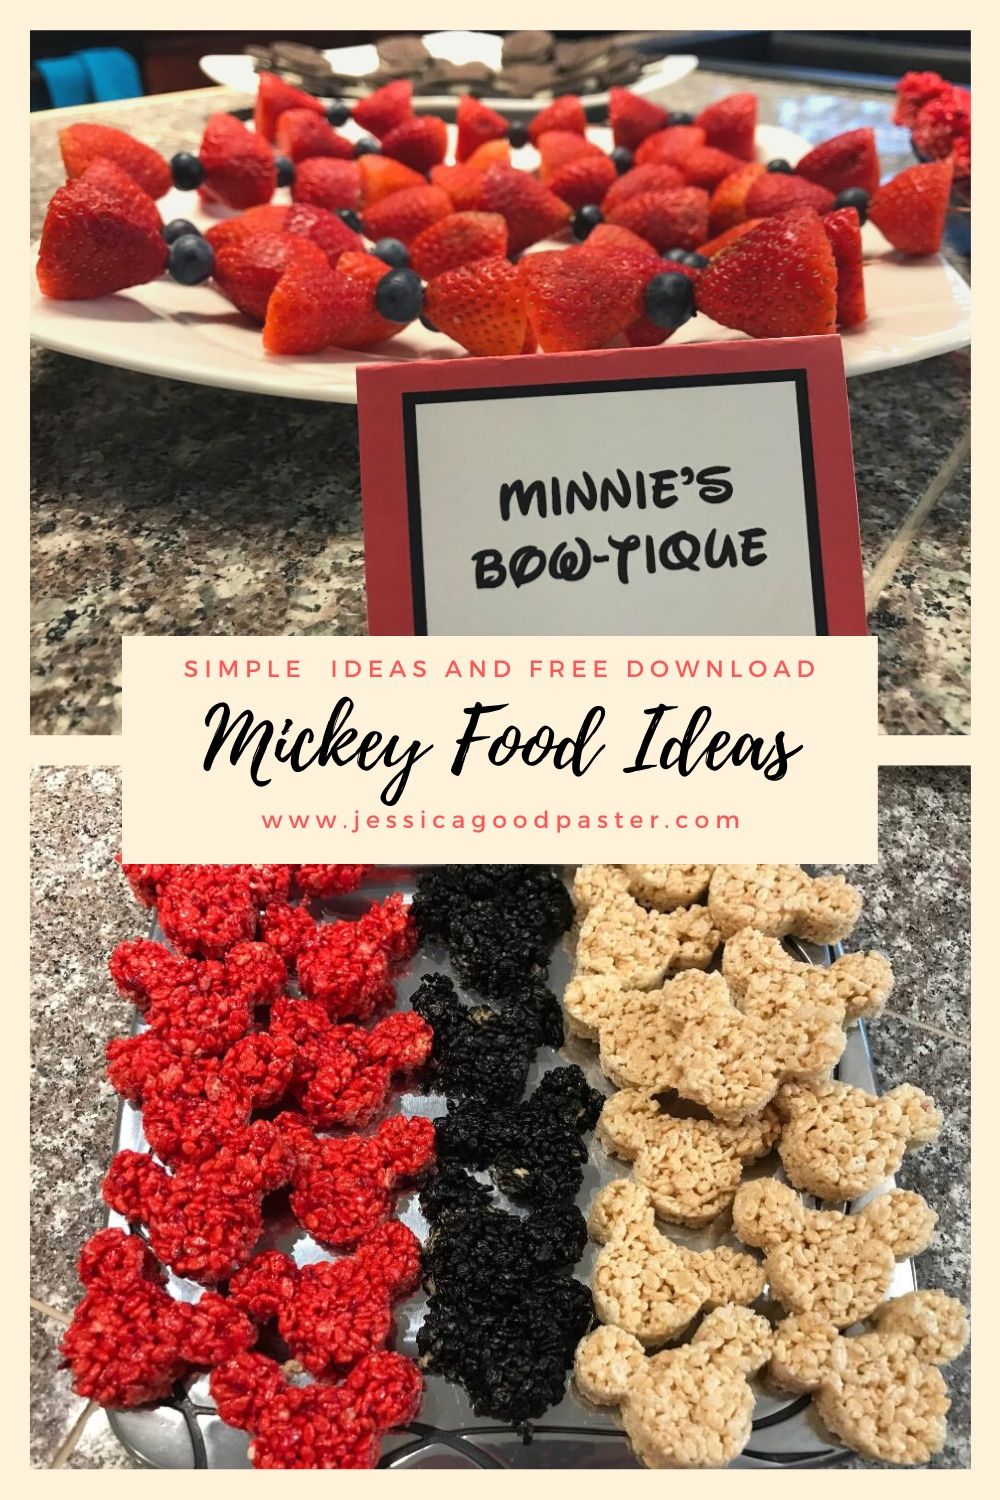 Mickey Mouse Party Food Ideas| Tons of affordable options for Mickey or Minnie parties including food ideas, decorations, outfits, games, party supplies, and free printables! Your Mickey Mouse Clubhouse fan will have a great birthday ! #mickeyparty #mickeymouse #mickeymouseparty #minnieparty #birthday #mickeymouseclubhouse #mickeyprintables